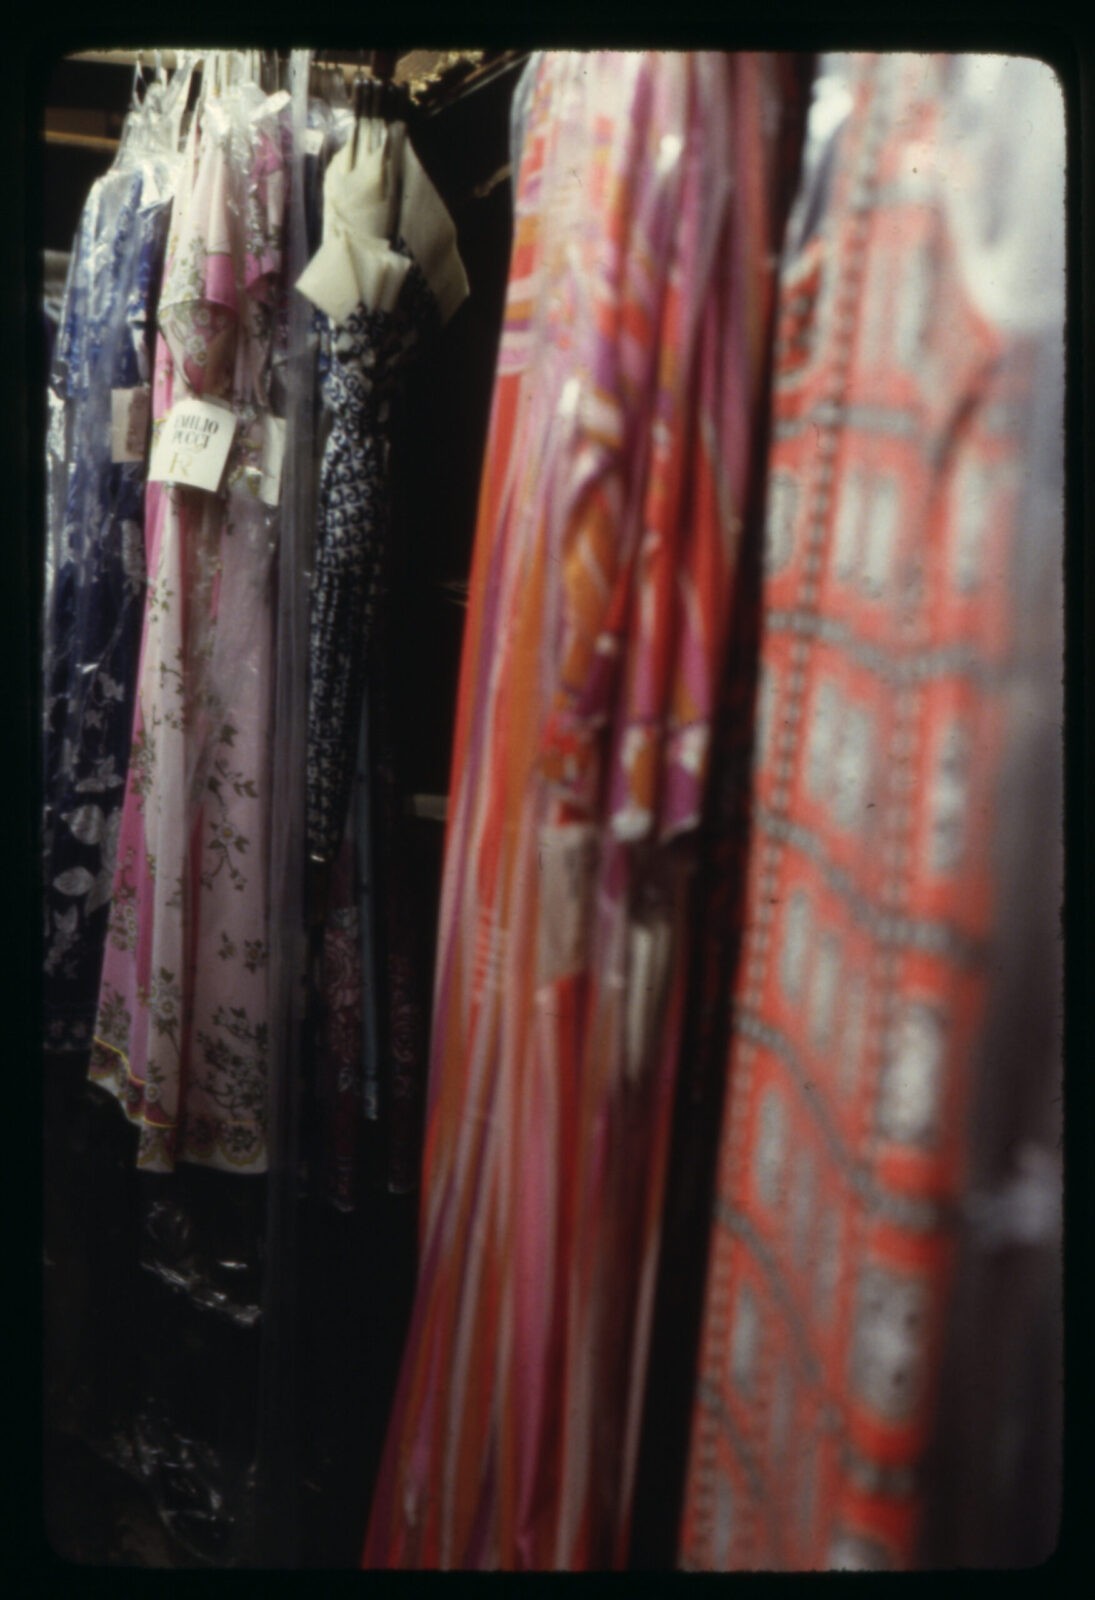 Four colorful garments with 1970s patterns wrapped in plastic hanging from racks. A blue and white umbrella also hangs from one of the racks.